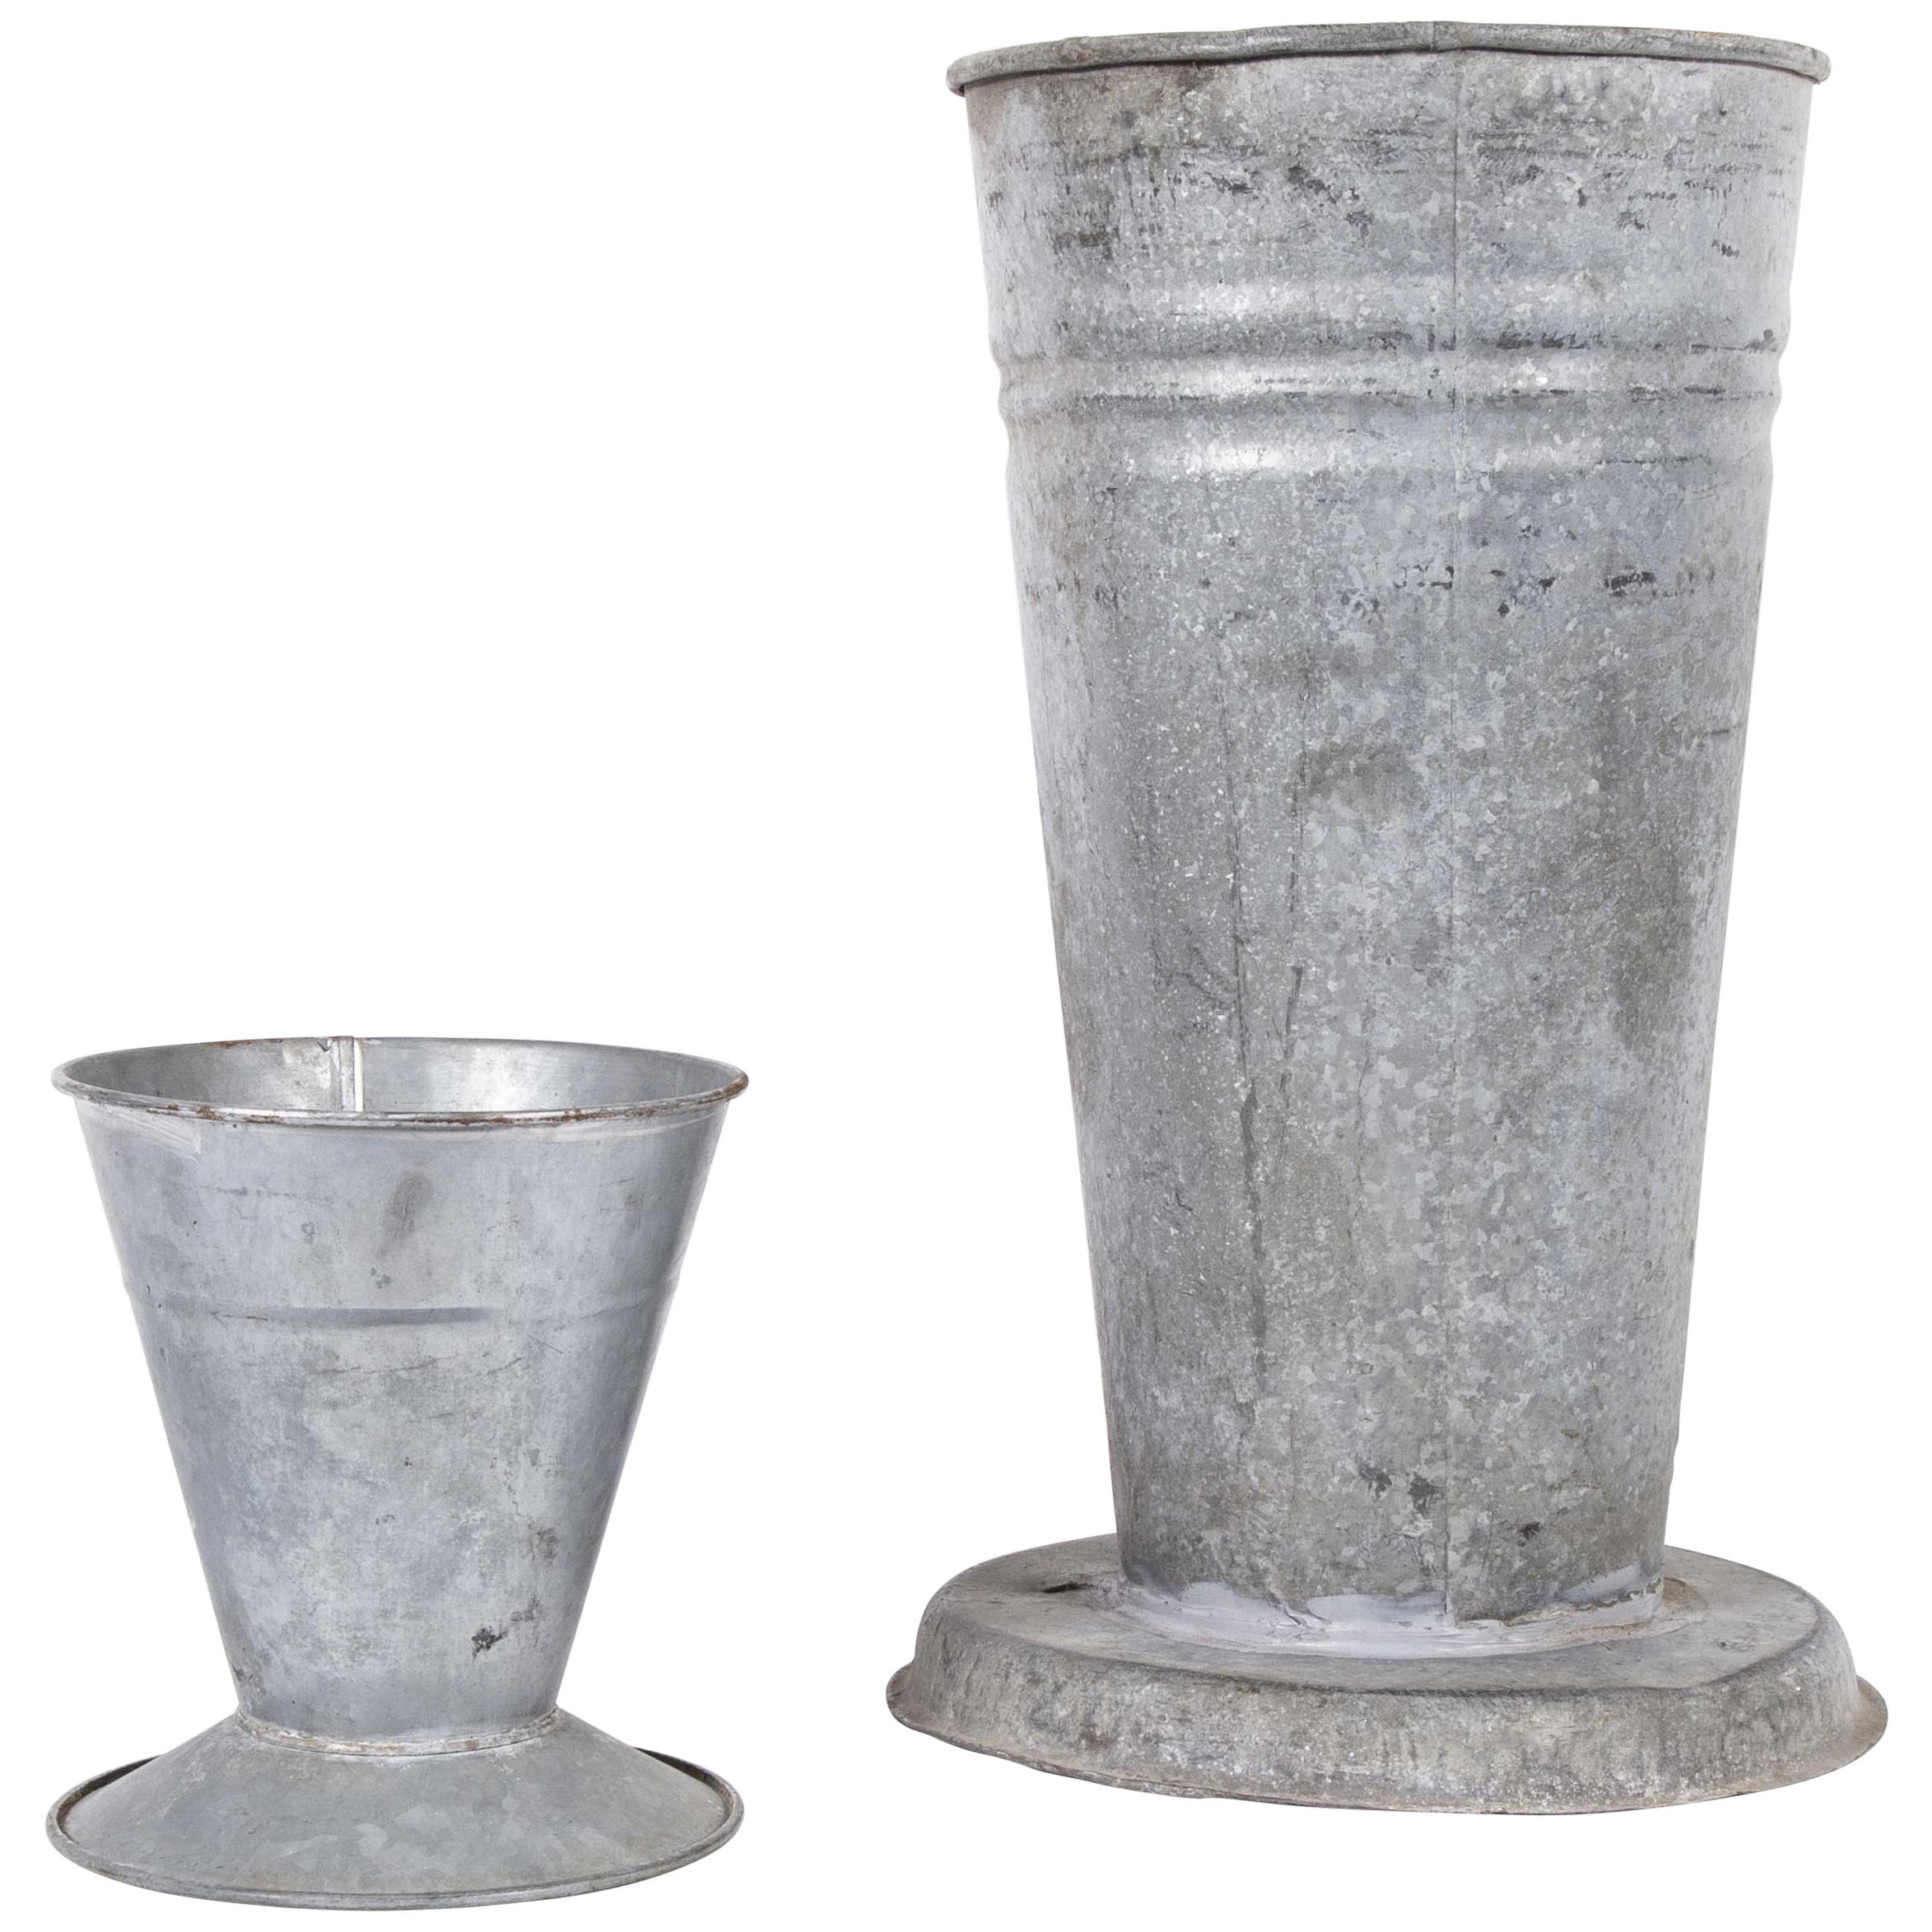 Pair of French Galvanized Flower Buckets, Vases